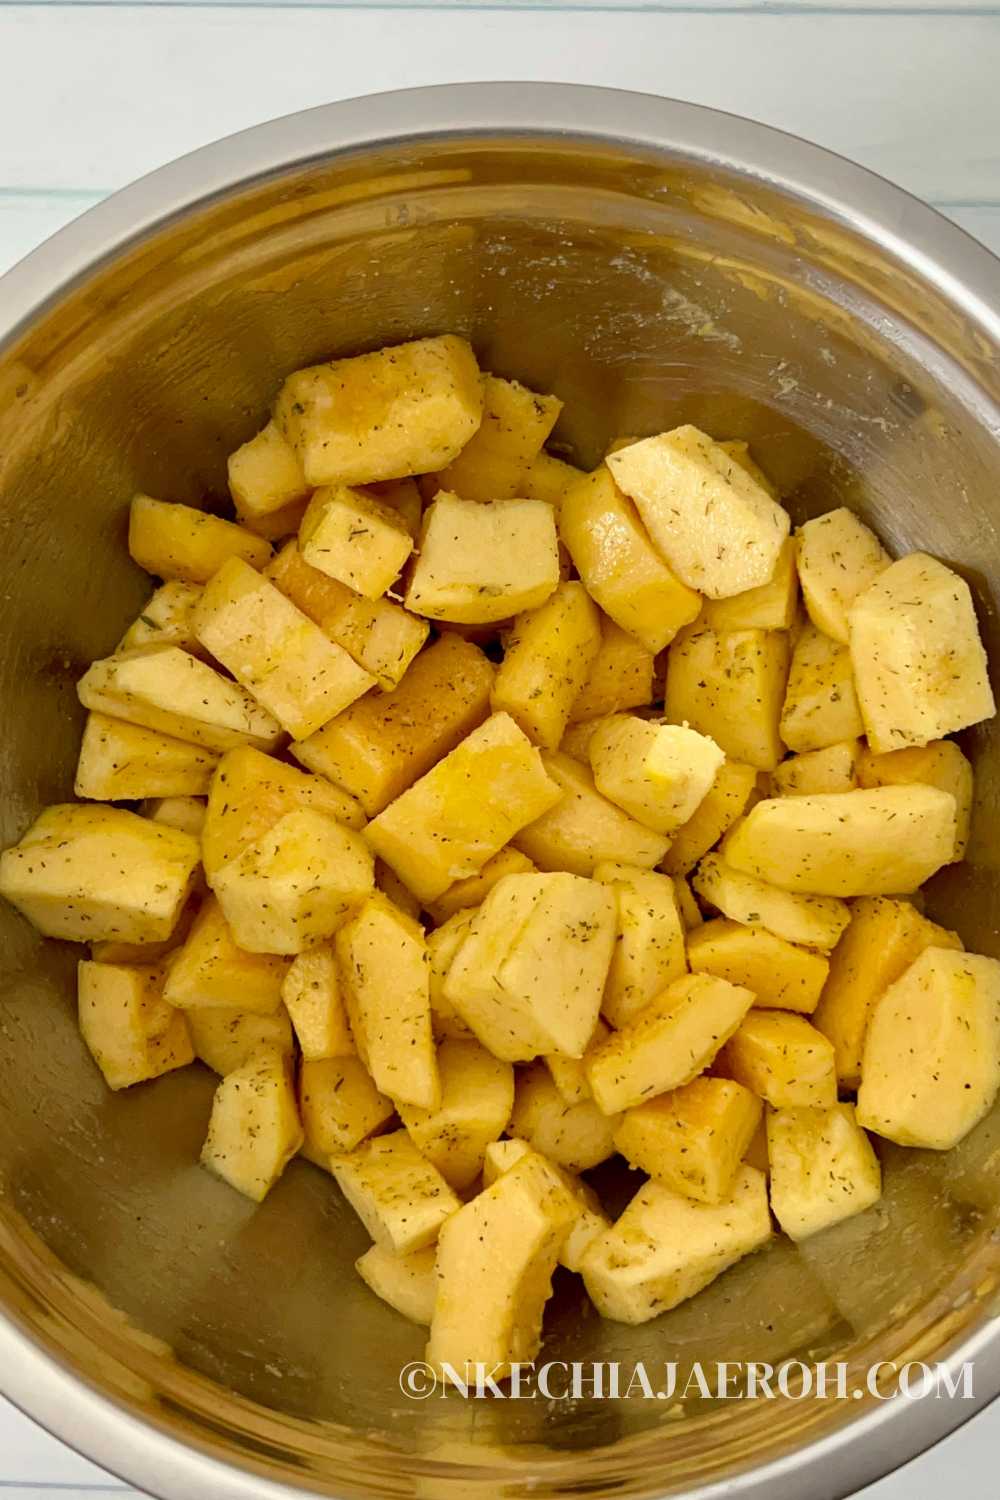 Put your acorn squash cubes into a bowl and drizzle with olive oil and seasonings. Stir it together with a spatula to coat evenly.